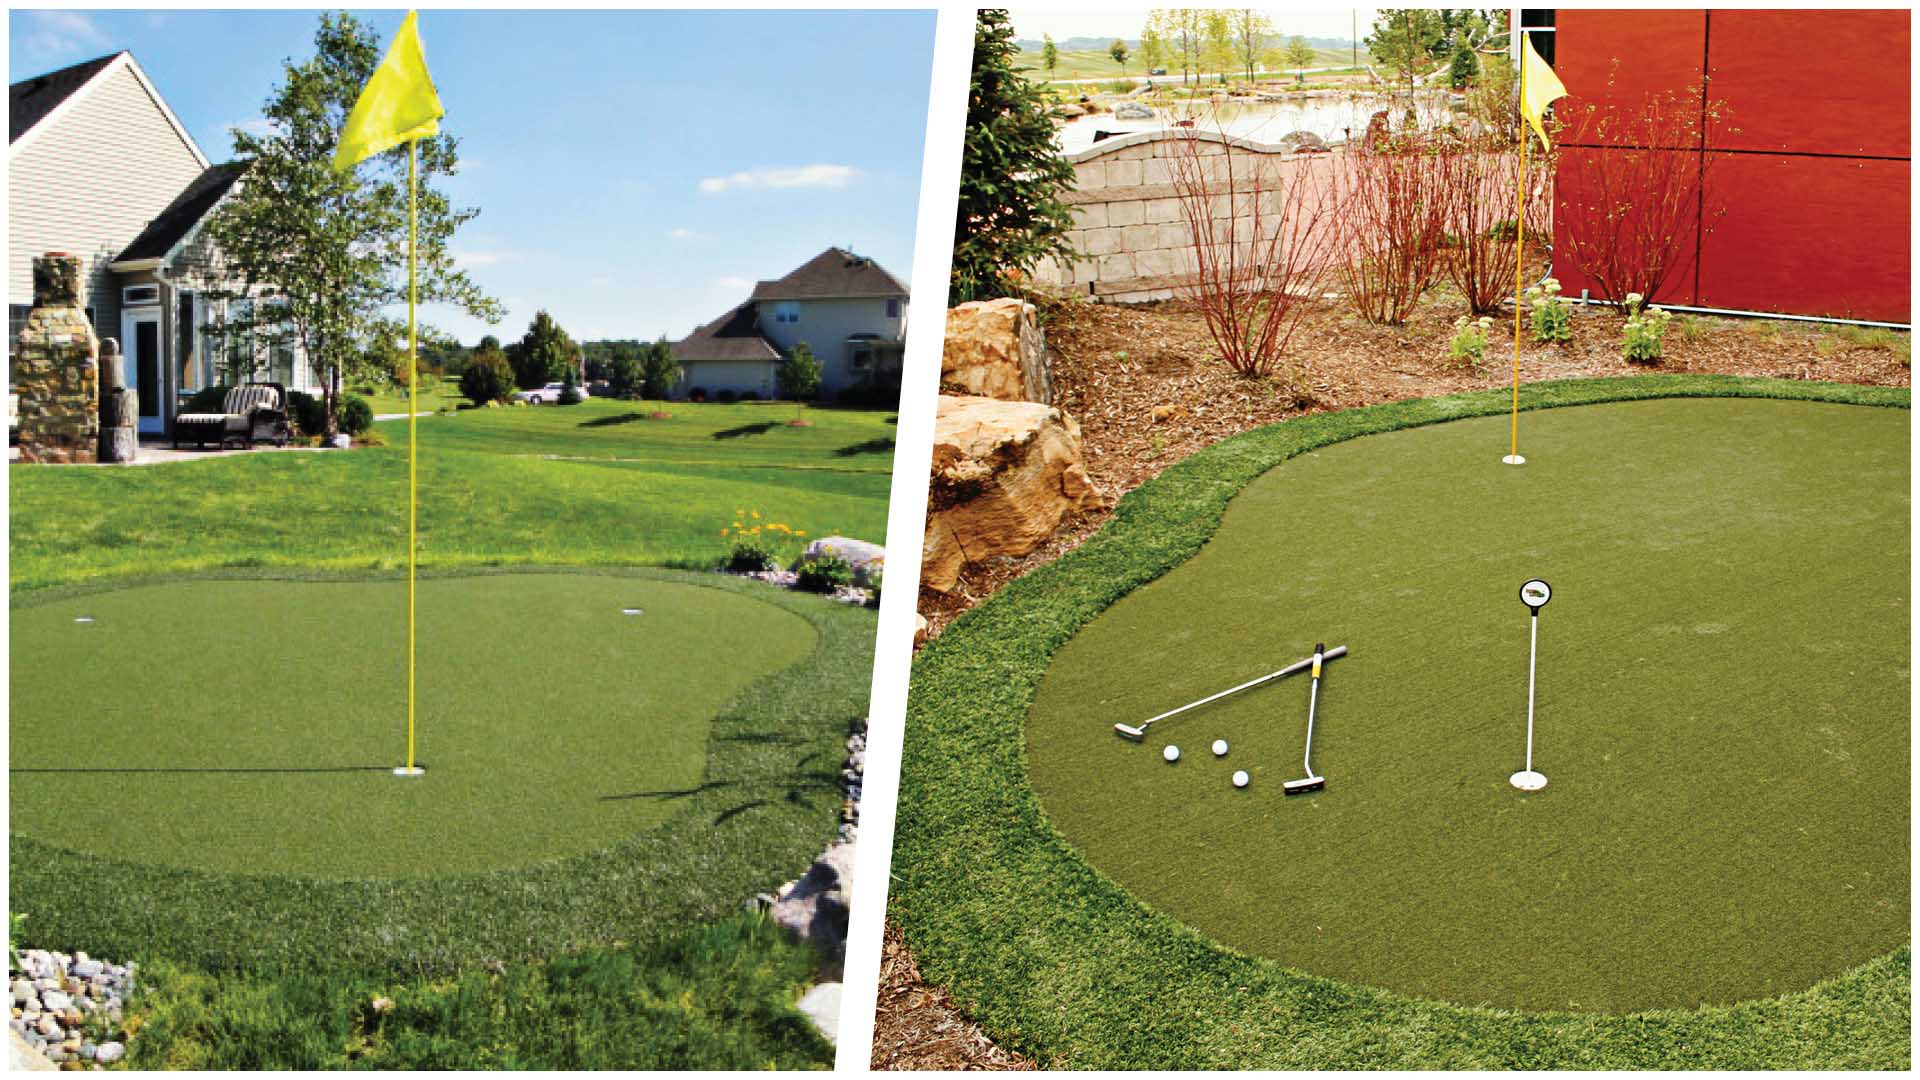 Relaunch Of Designer Greens Easy To Assemble Outdoor Putting Green Kits